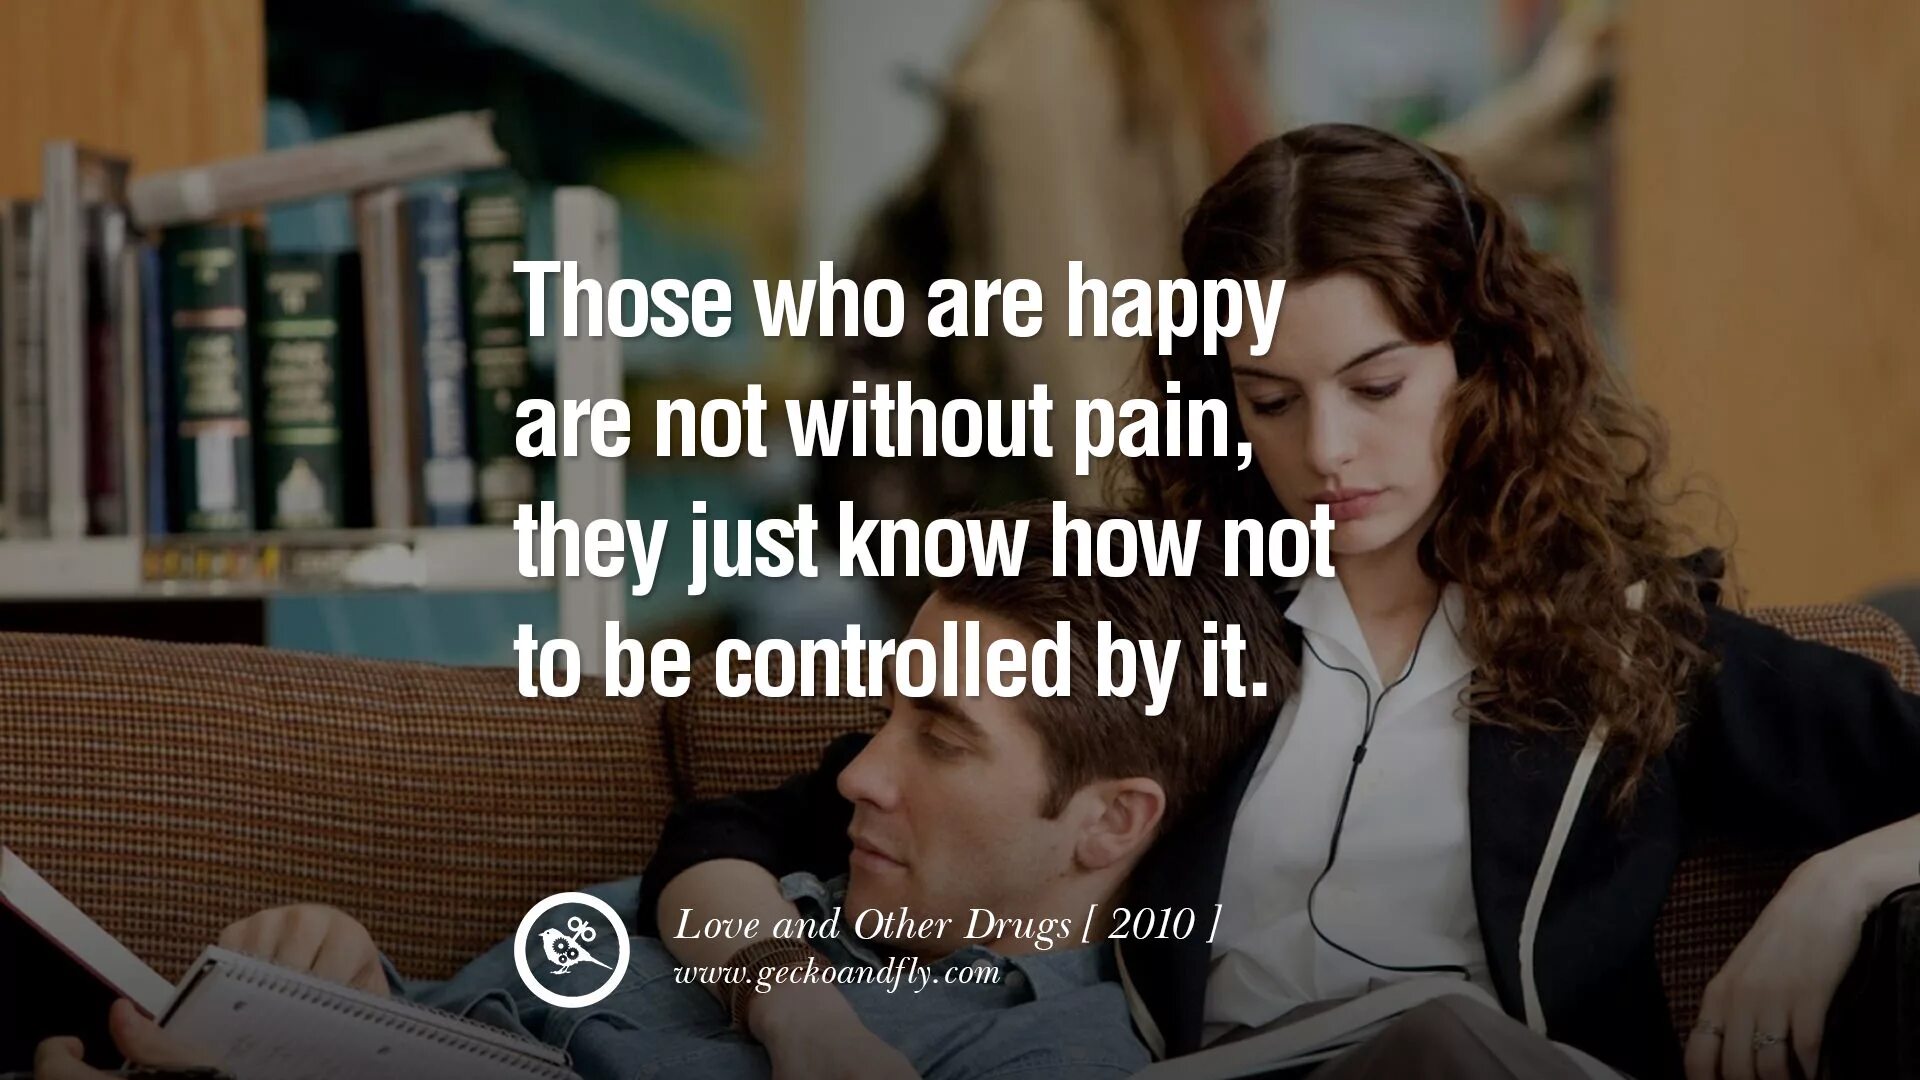 Without pain. Quotes from films. Famous movie quotes. Famous quotes from movies.